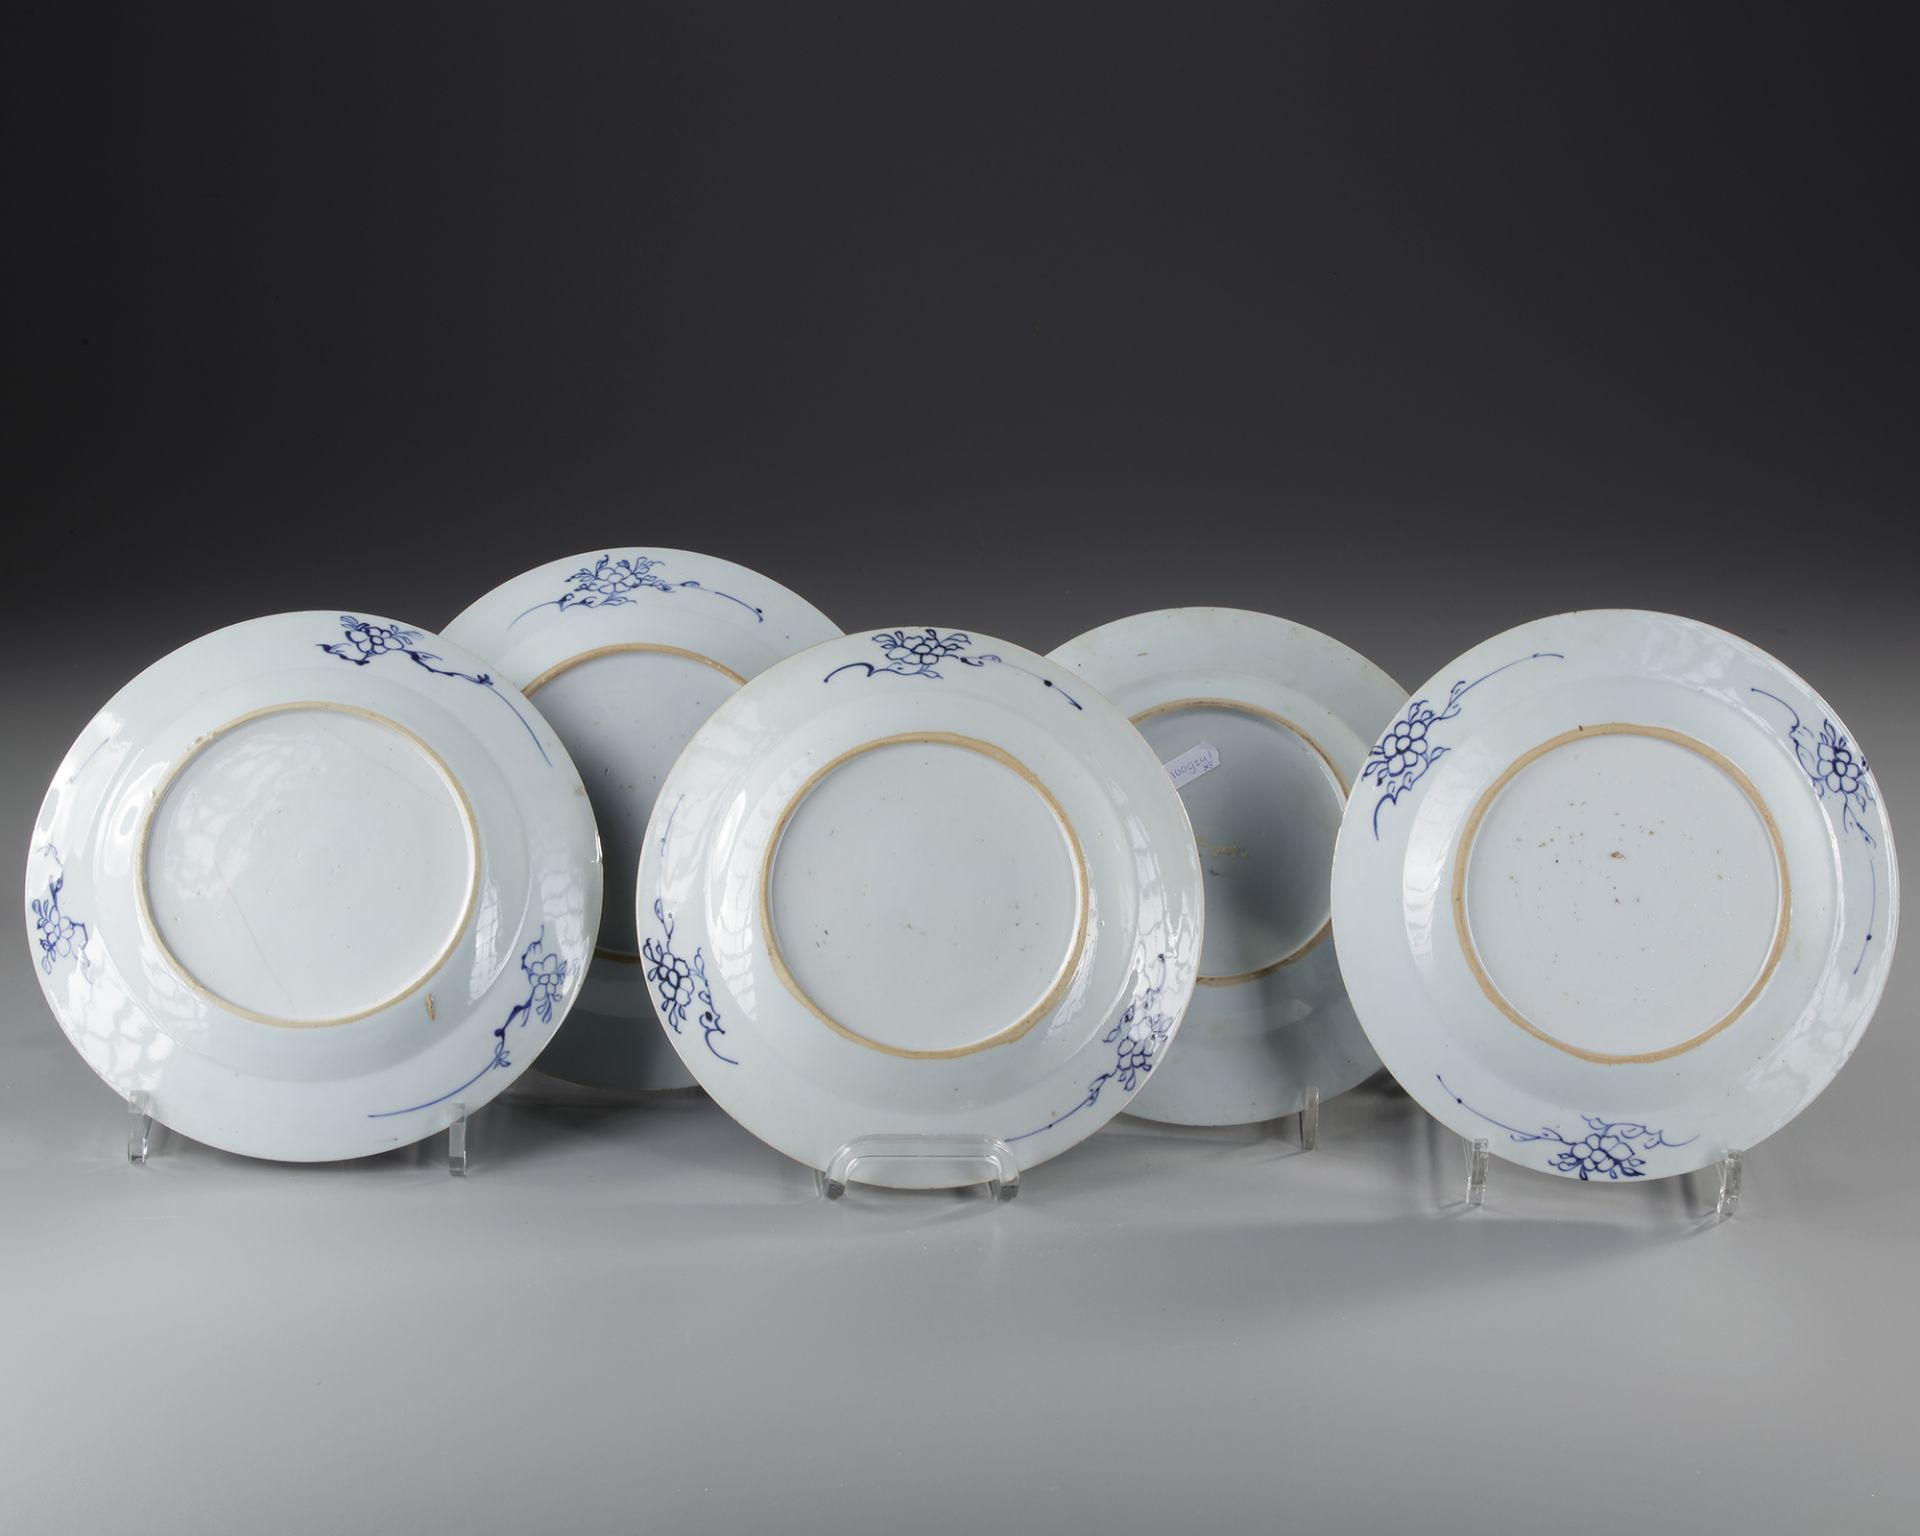 FIVE CHINESE PORCELAIN DISHES, 18TH CENTURY - Image 2 of 2